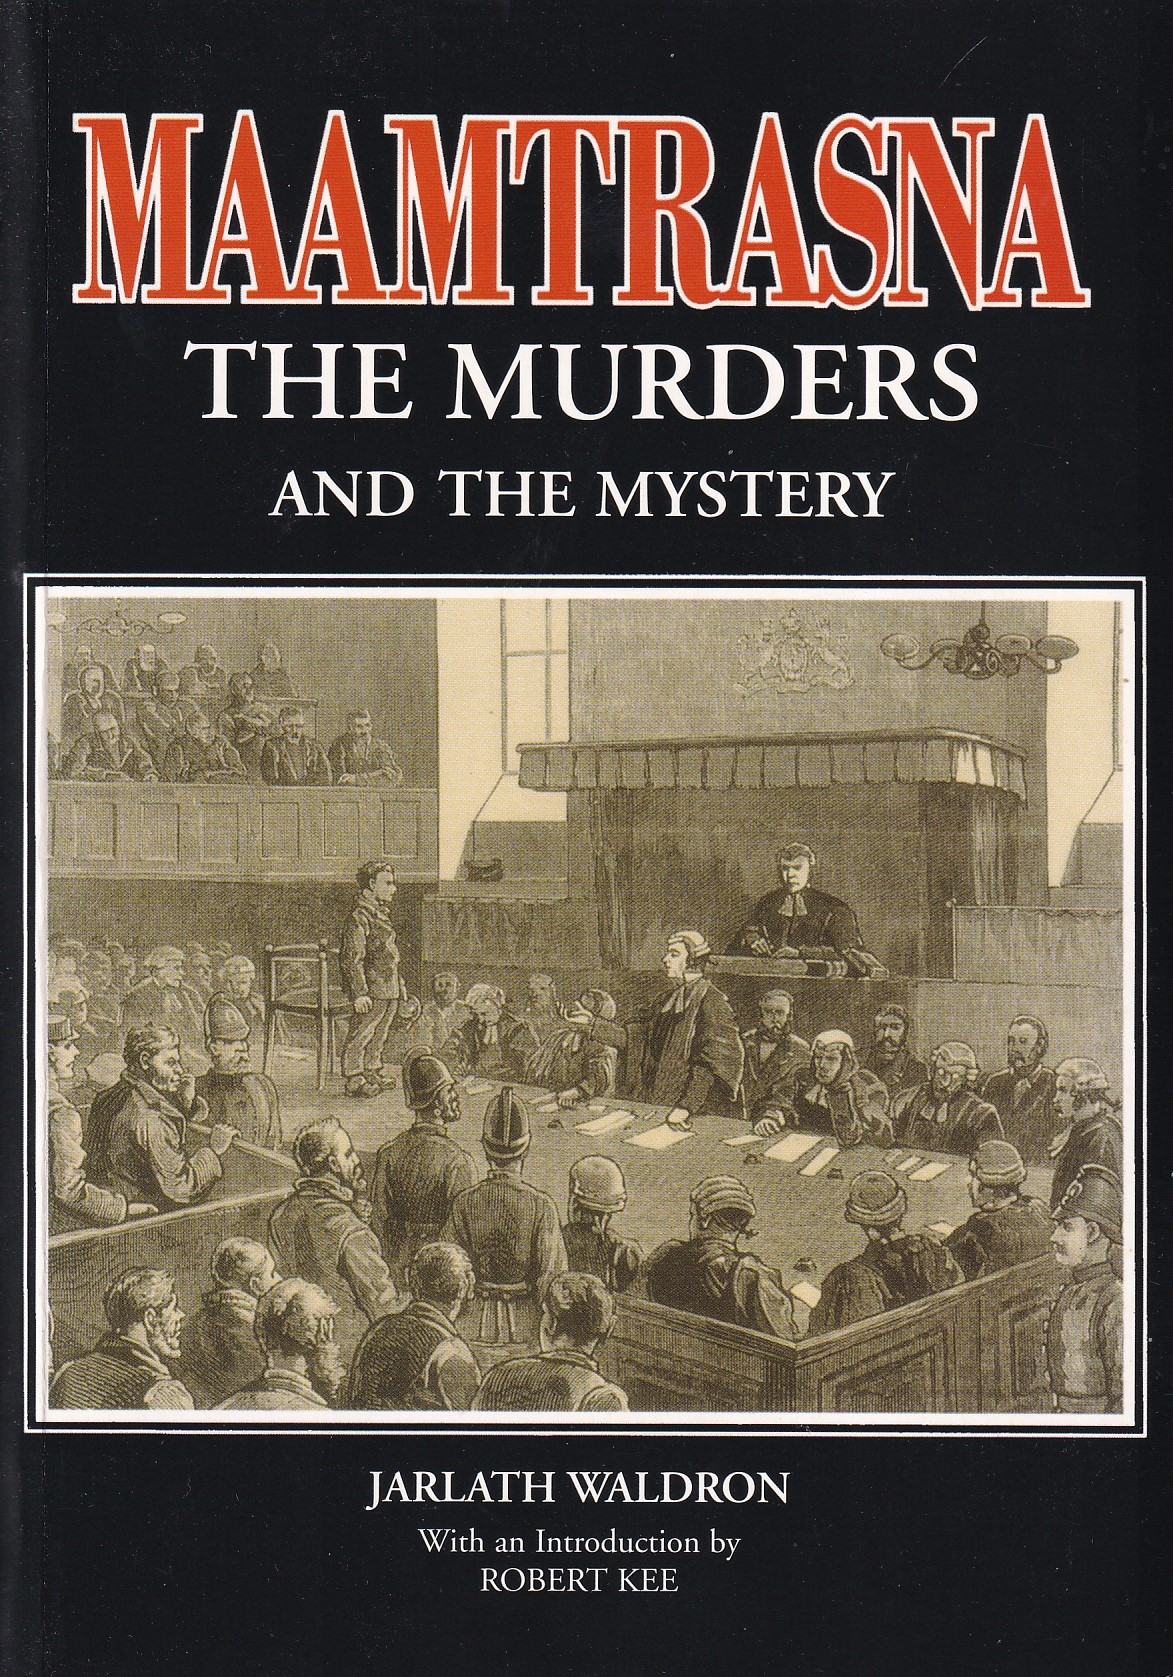 Maamtrasna: The Murders and the Mystery by Jarlath Waldron